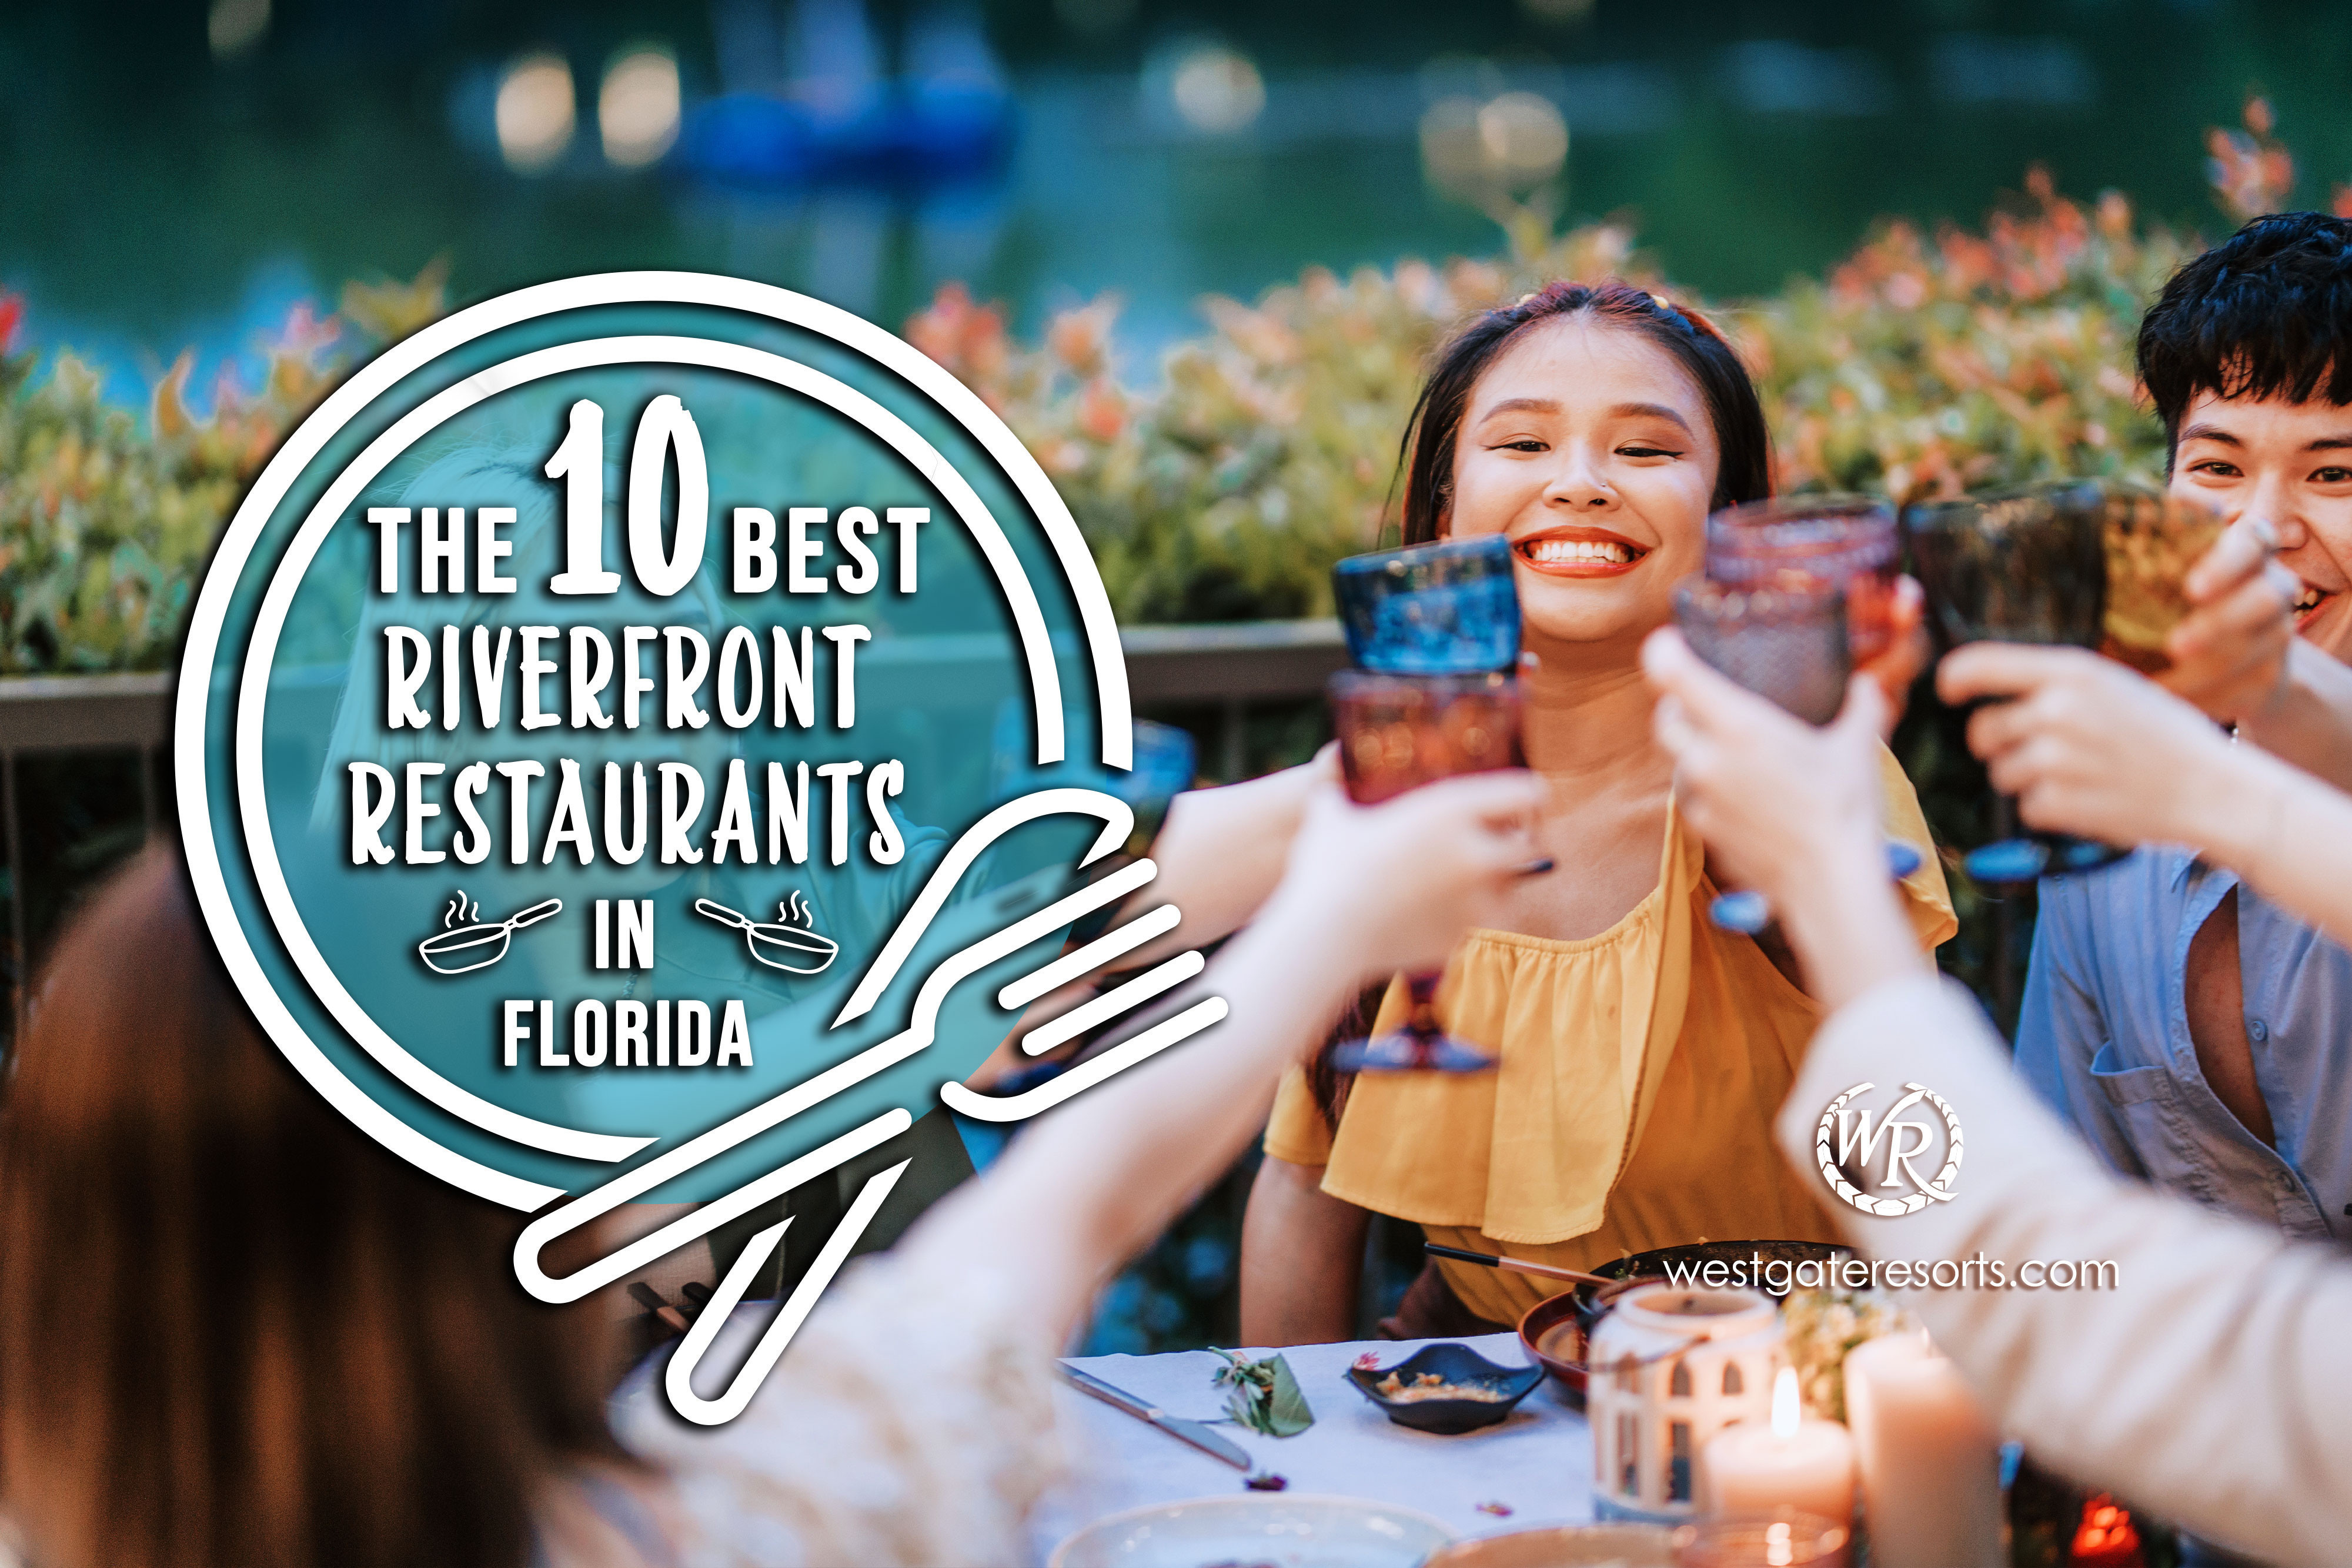 The 10 Best Riverfront Restaurants in Florida with Awesome Water Views